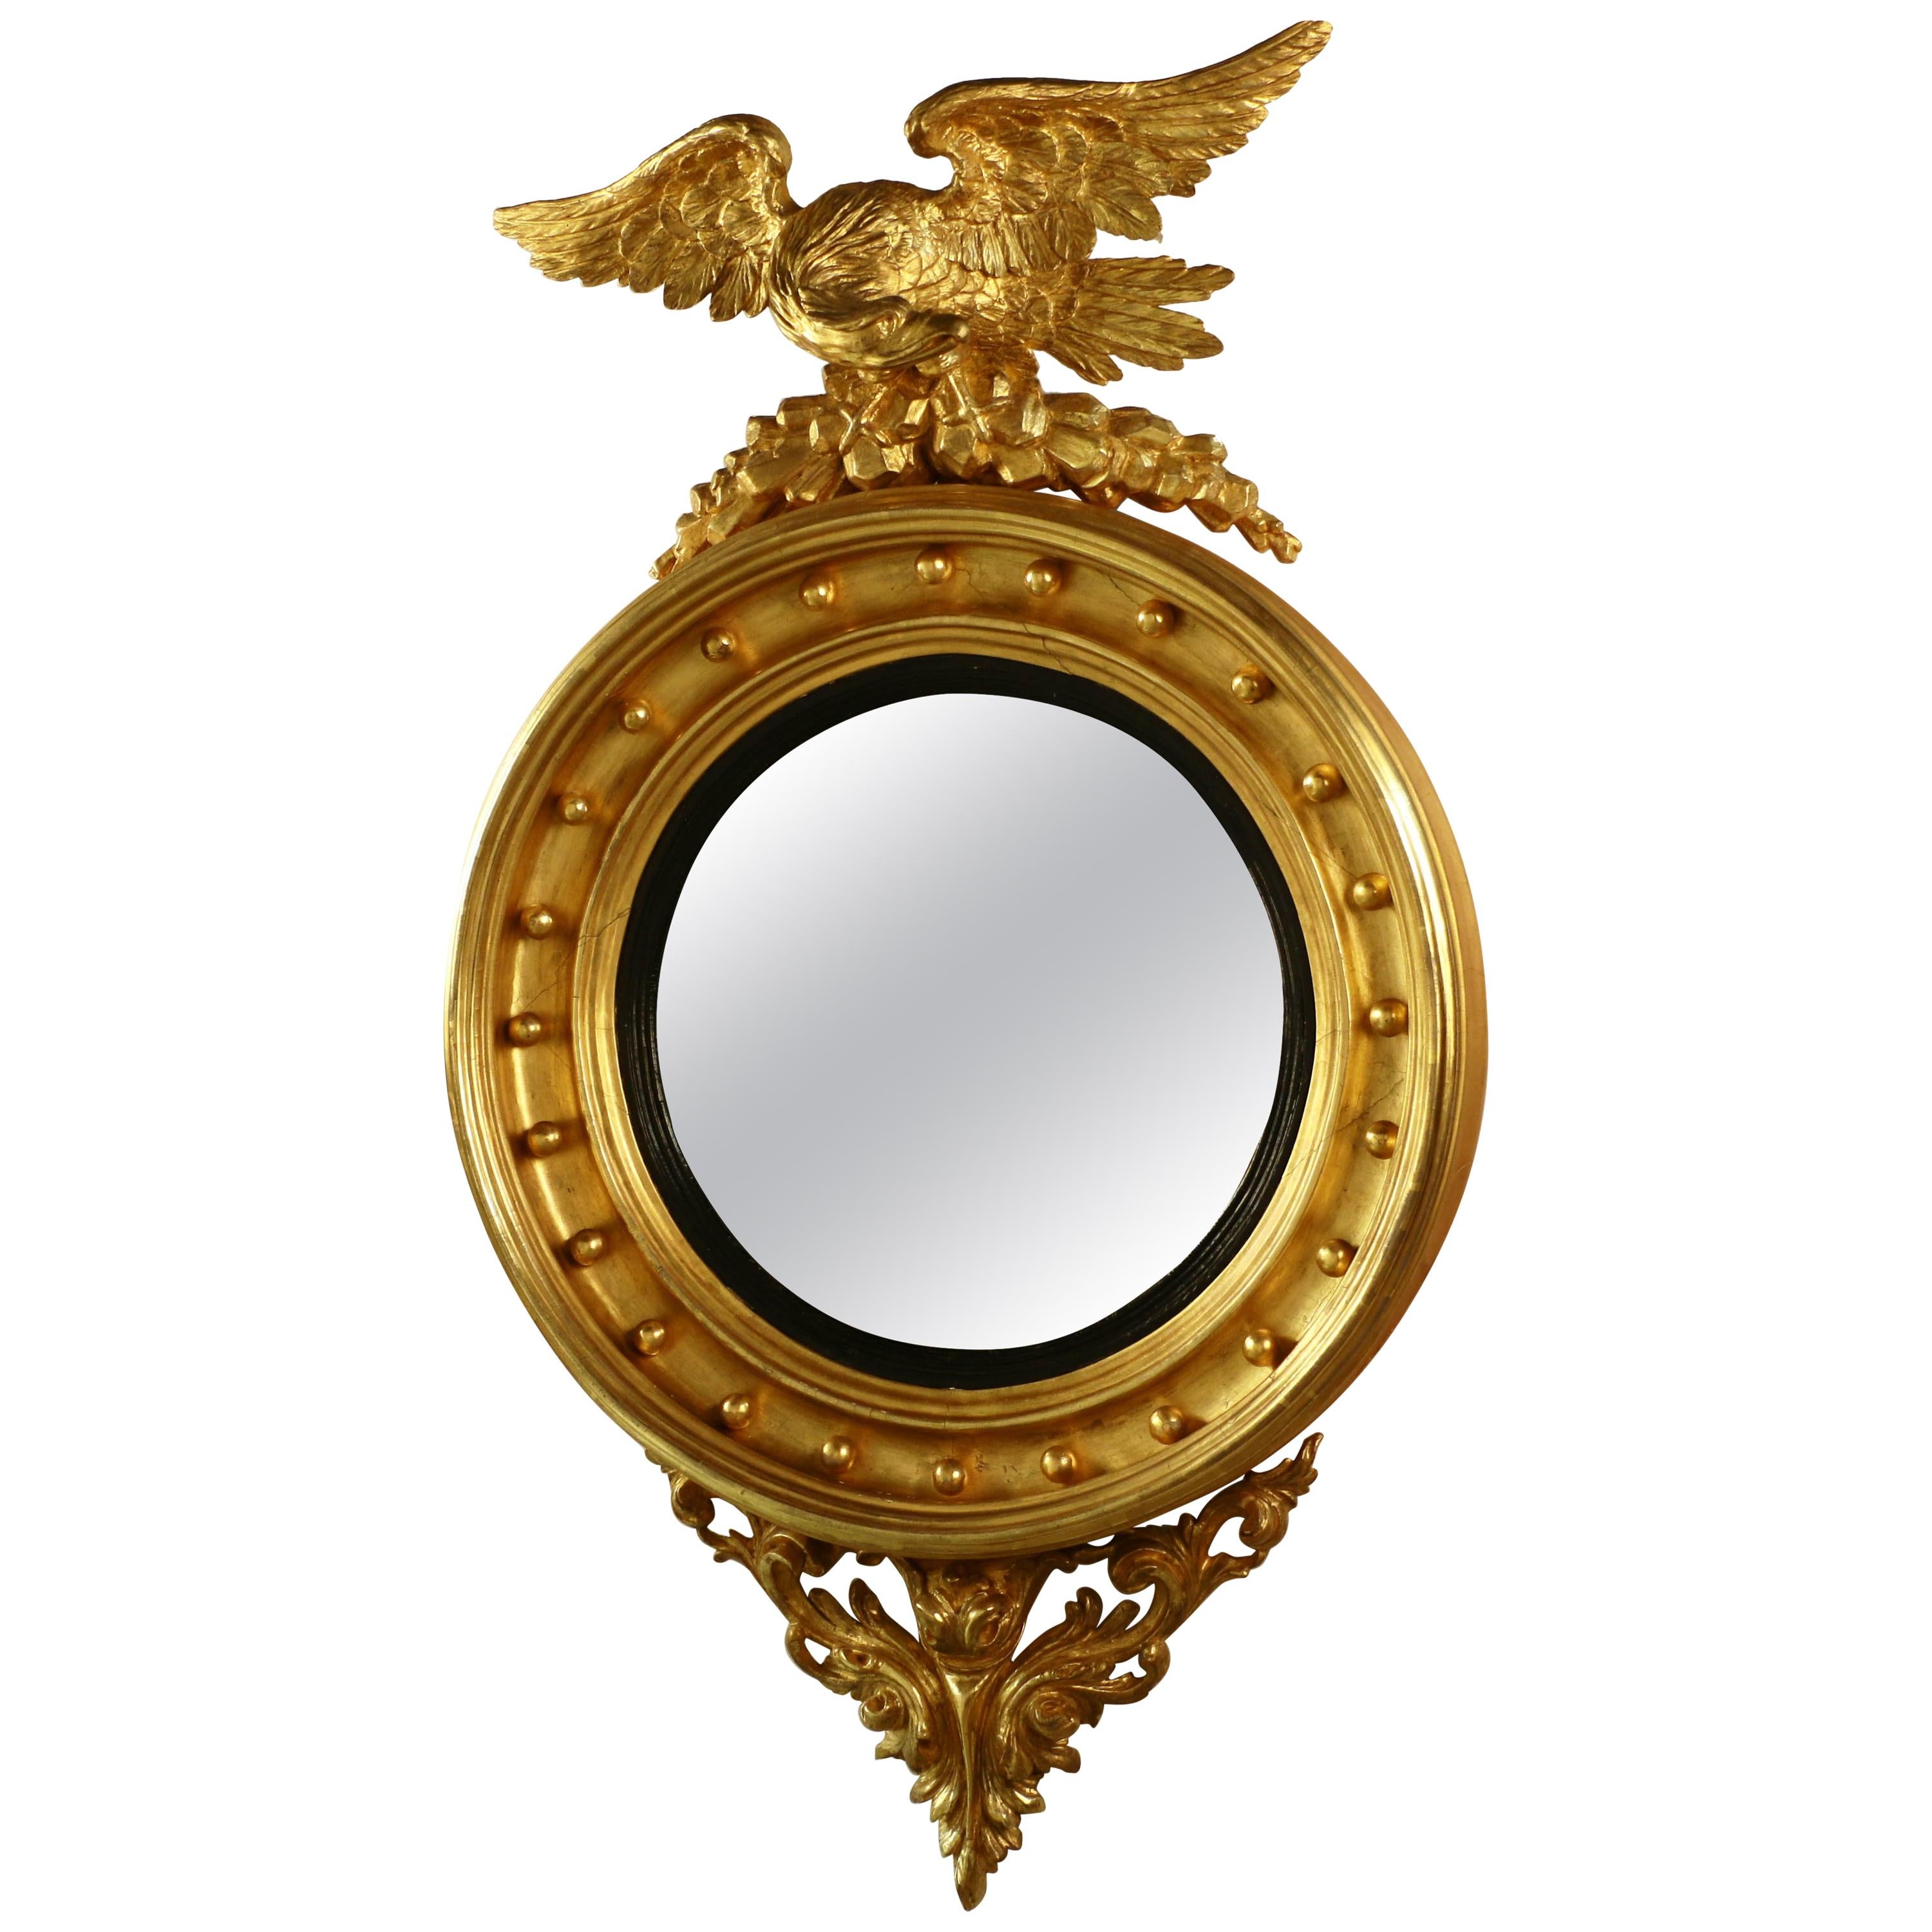 Antique Federal Giltwood Convex Mirror with Eagle Crest